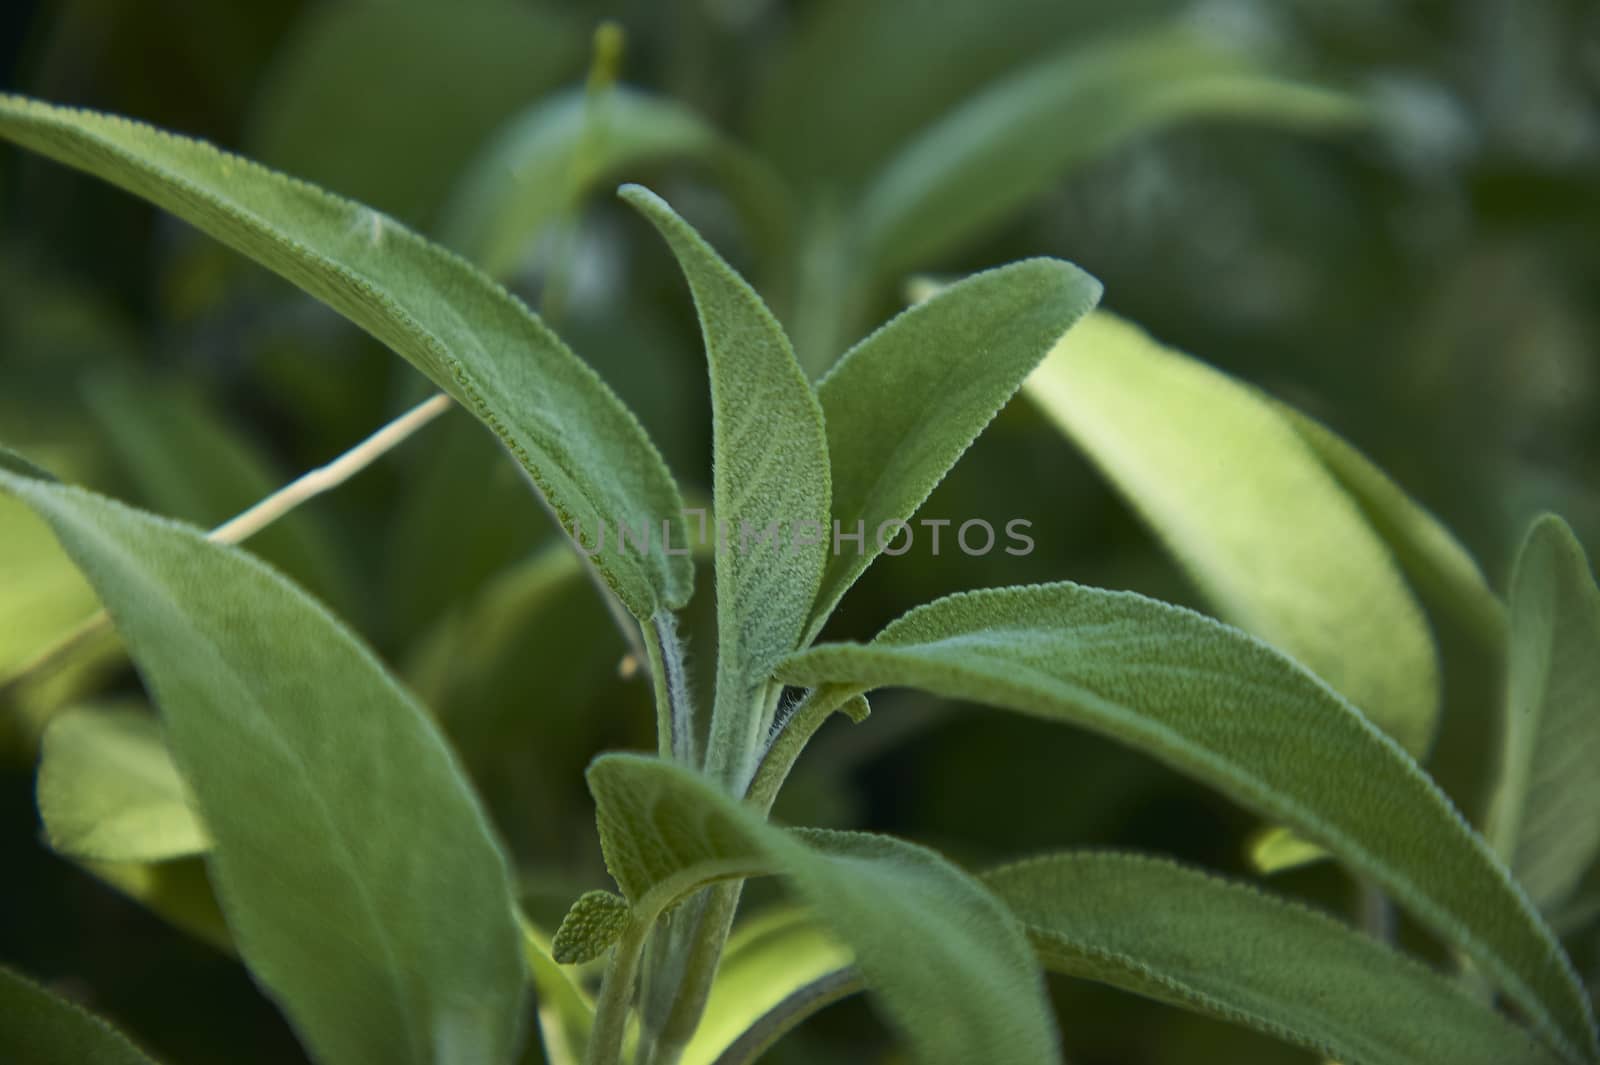 Magnifying a Salvia Sage leaf, a plant used as a spice in the kitchen.